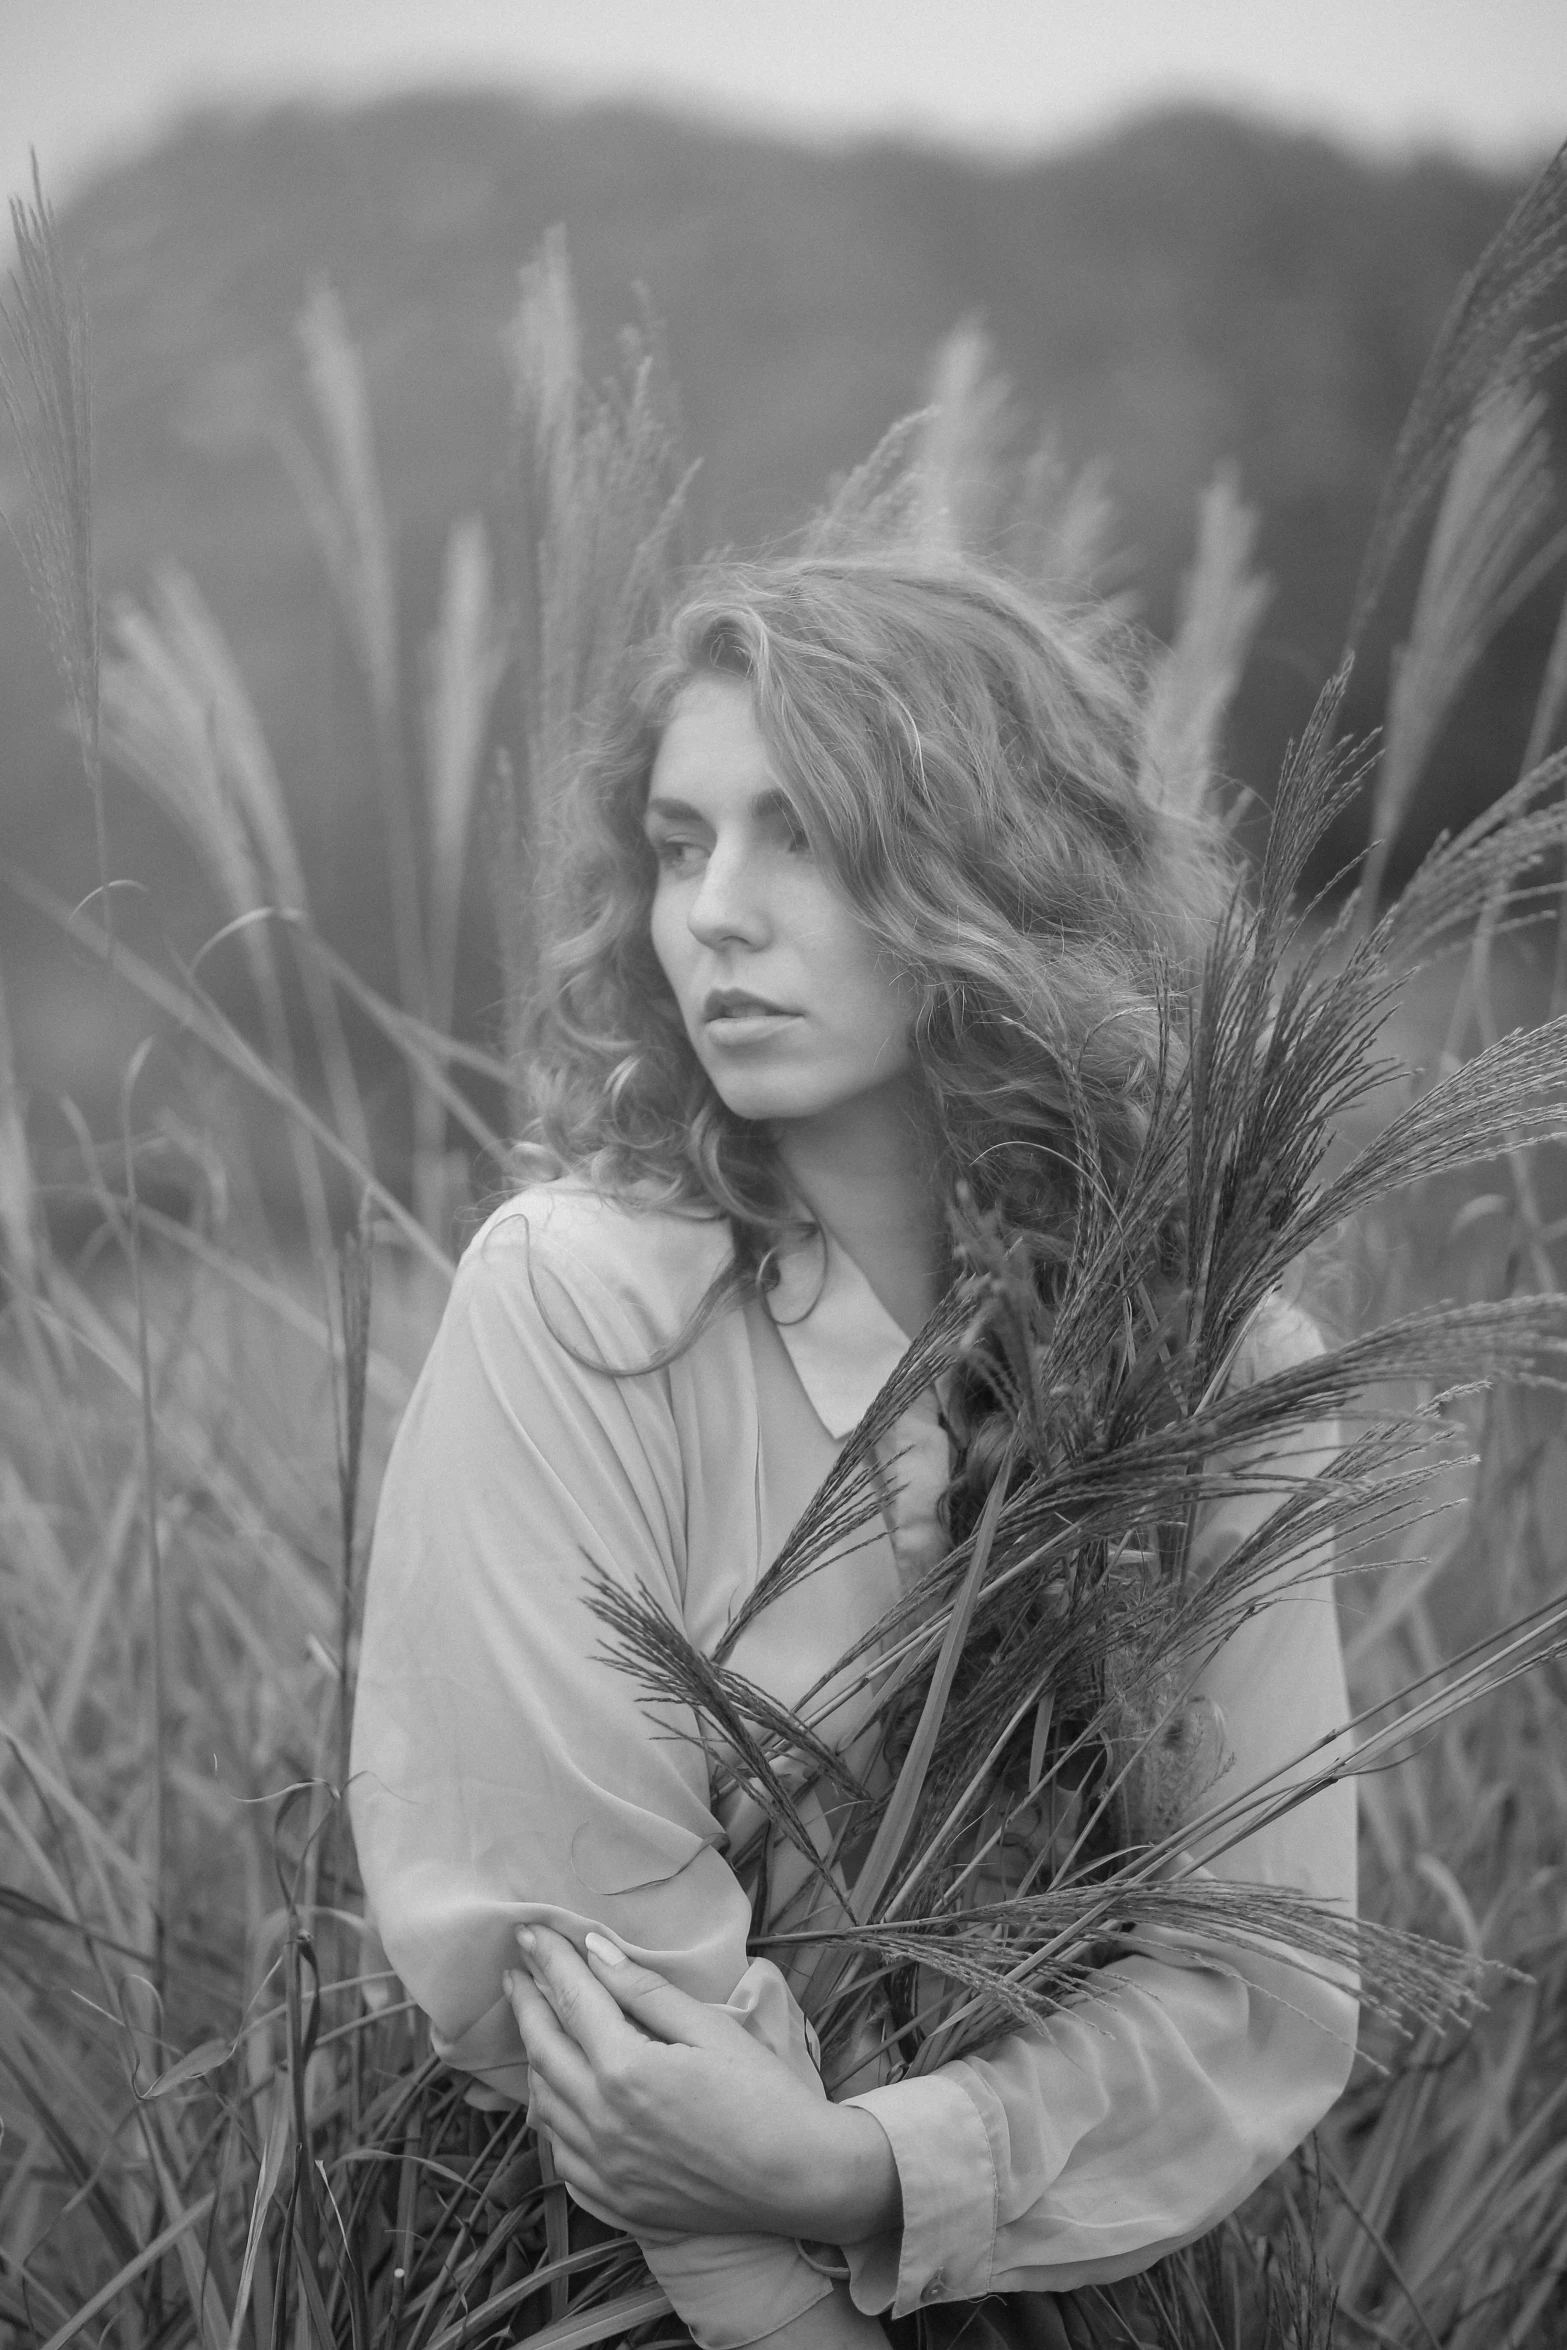 a black and white photo of a woman in a field, by Felix-Kelly, art photography, portrait image, medium format, feathered hair, 15081959 21121991 01012000 4k